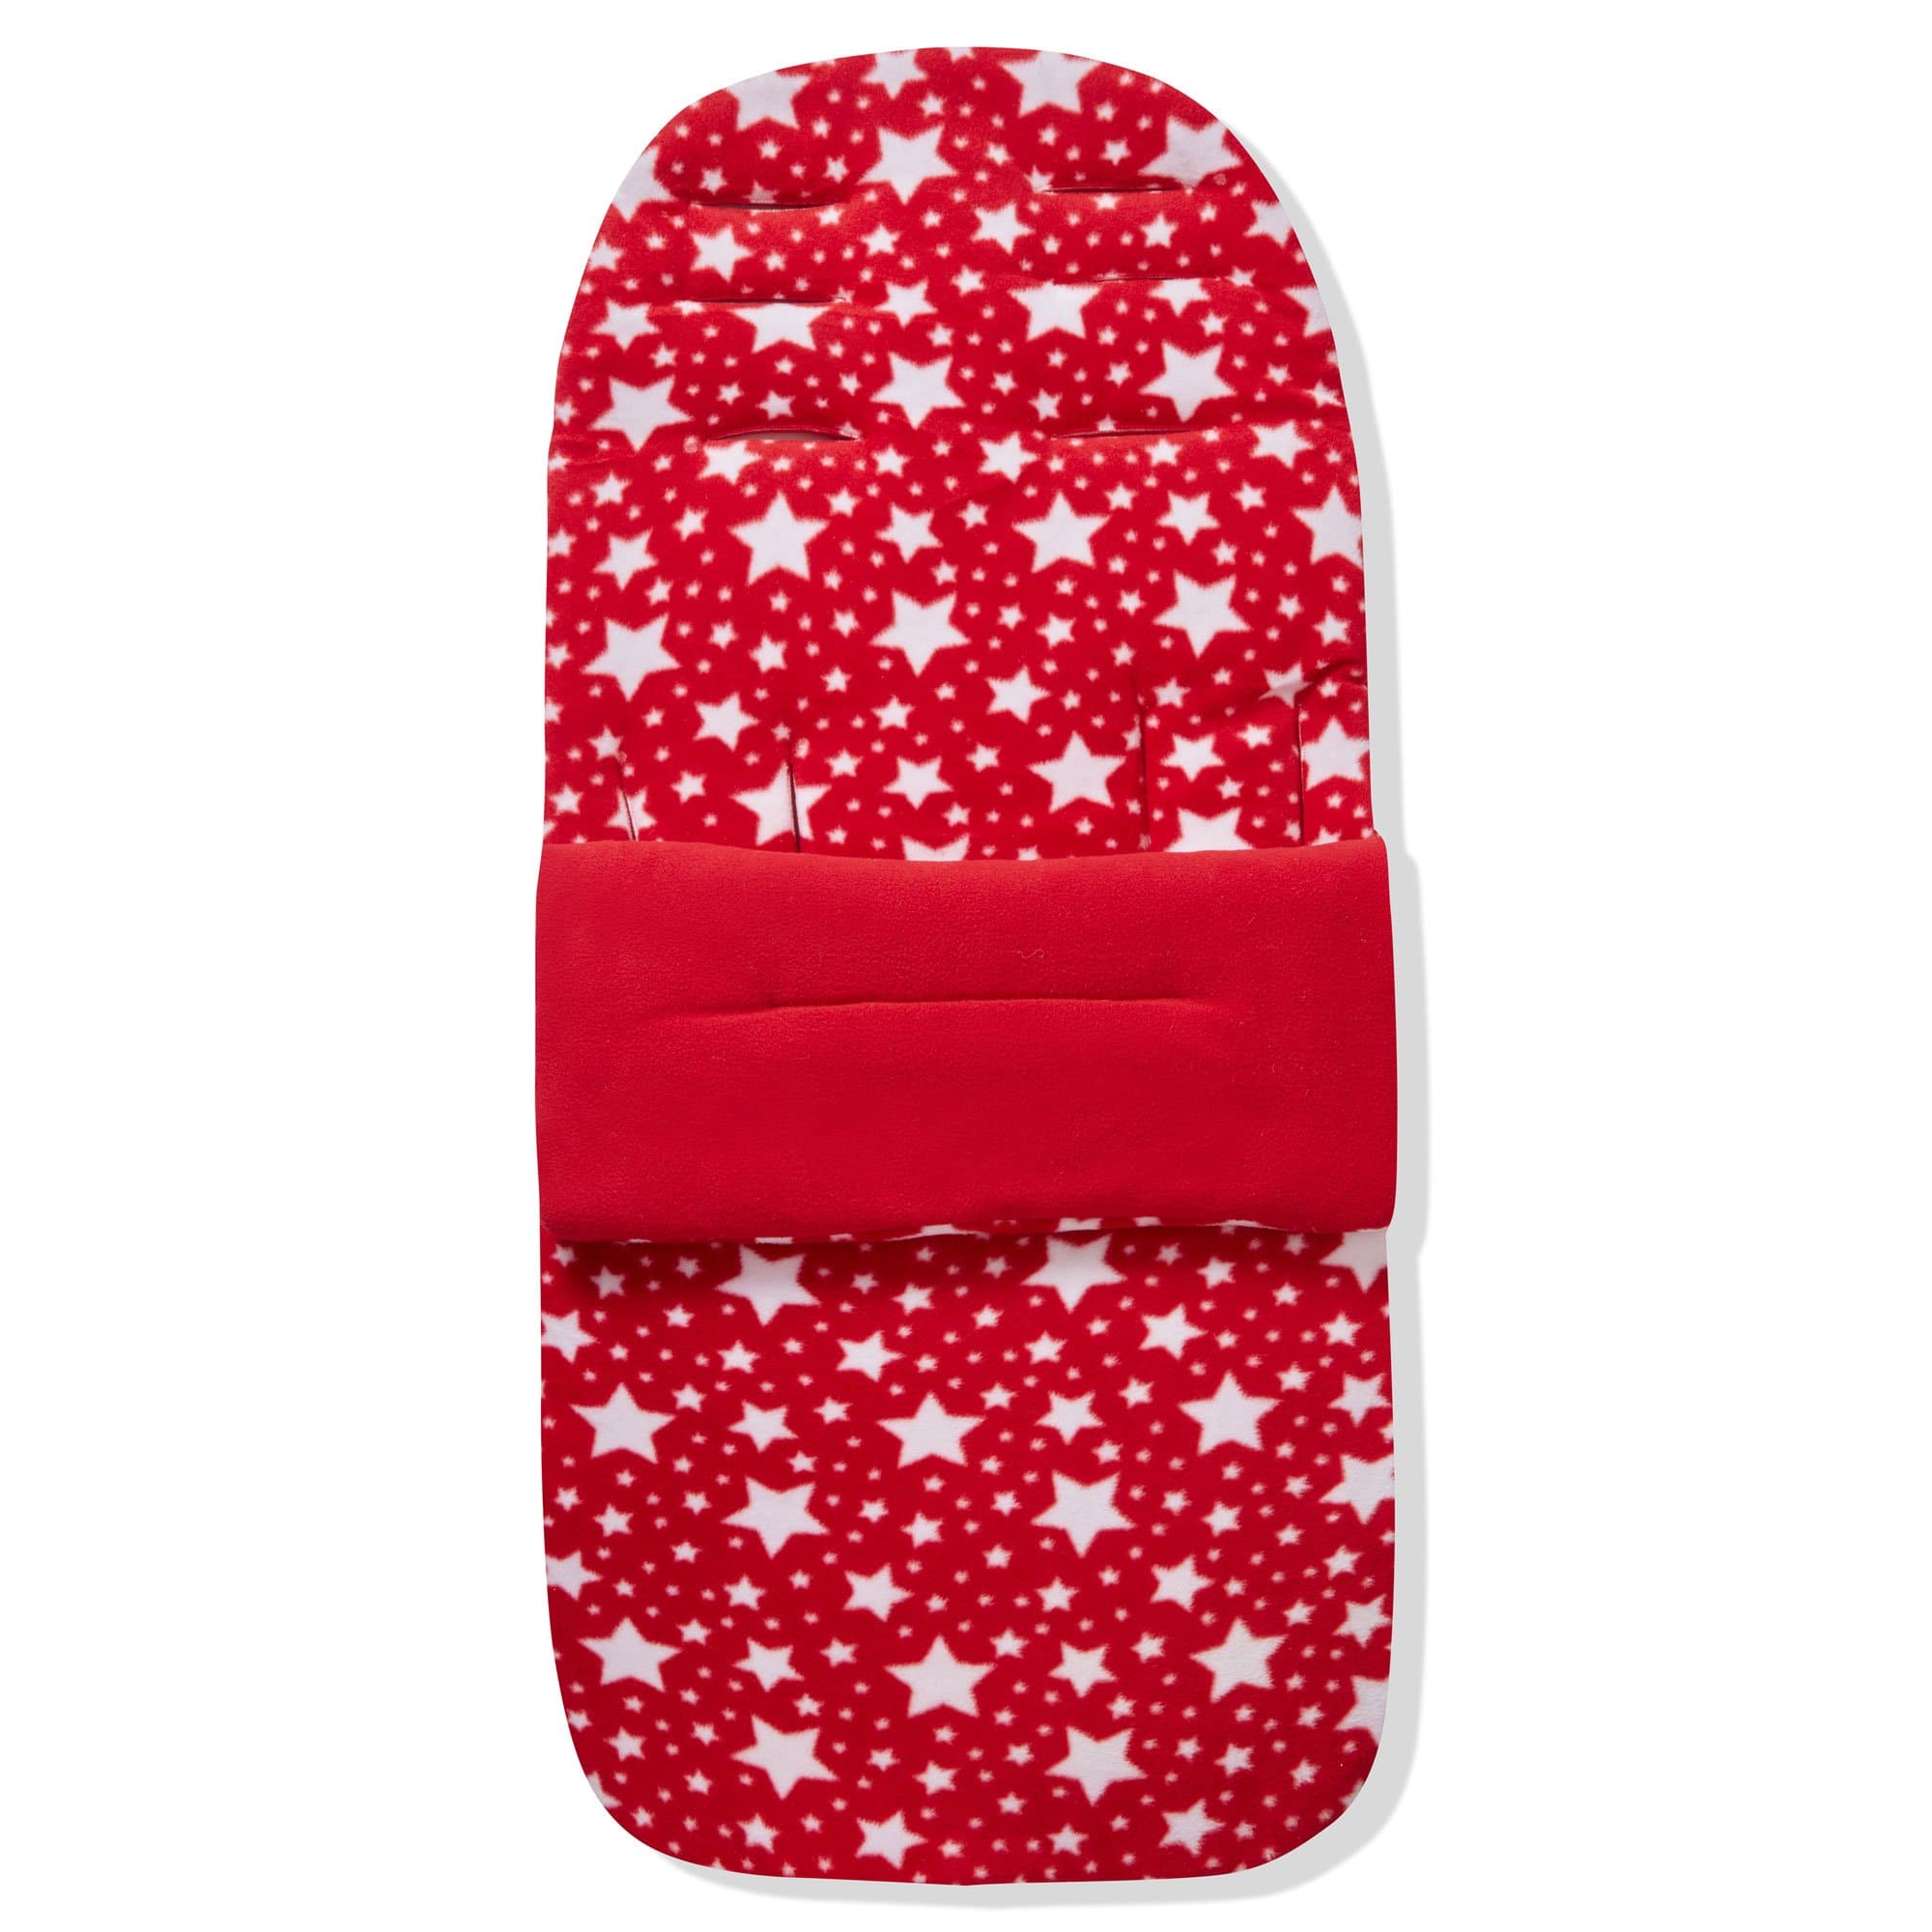 Fleece Footmuff / Cosy Toes Compatible With DoBuggy - Red Star / Fits All Models | For Your Little One